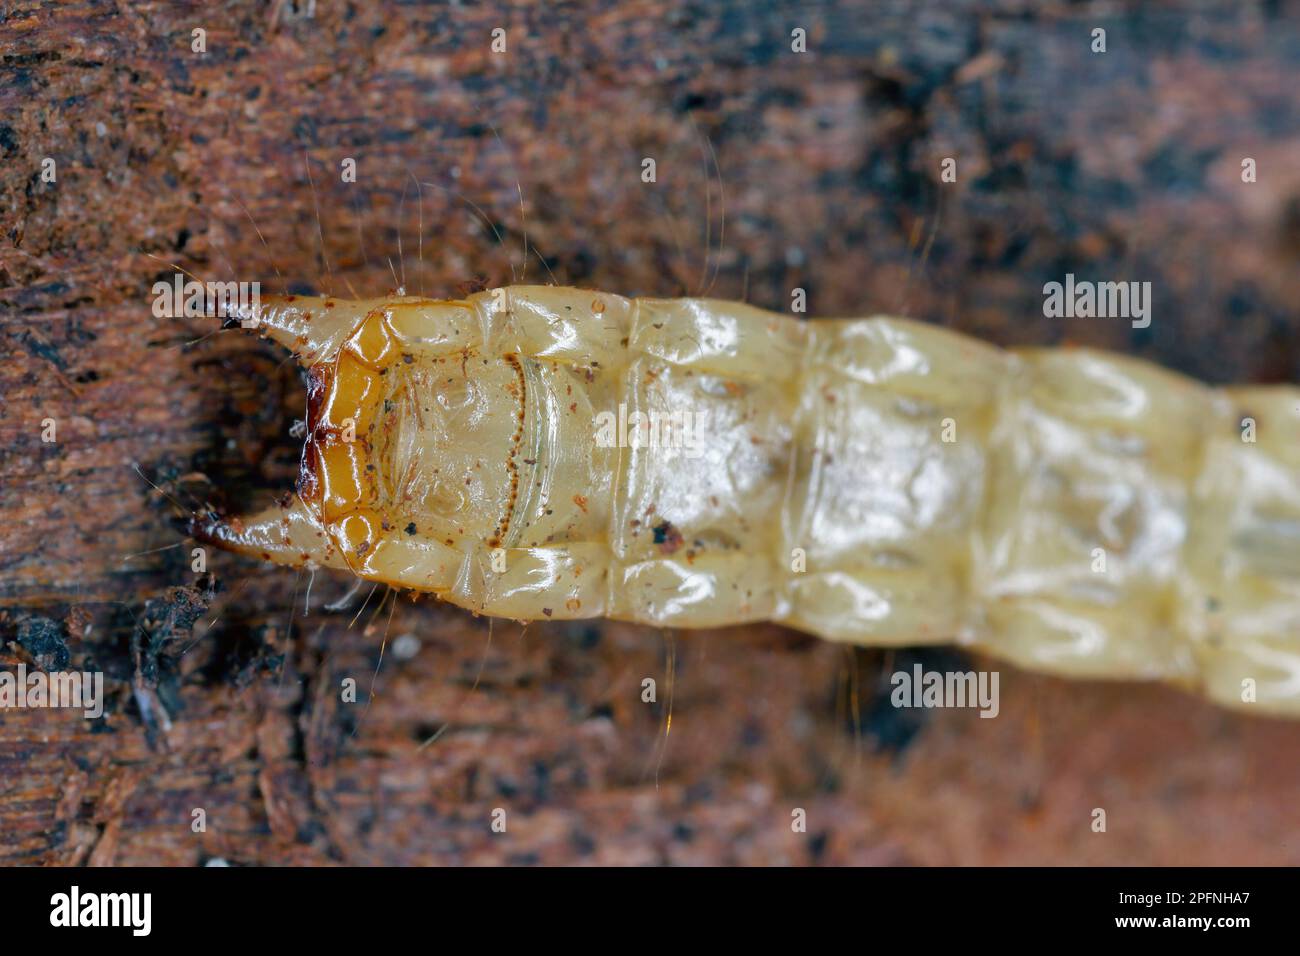 Pytho depressus larva of this beetle (Pythidae family) on under pine bark. The characteristic shape of the end of the body. View from Below. Stock Photo